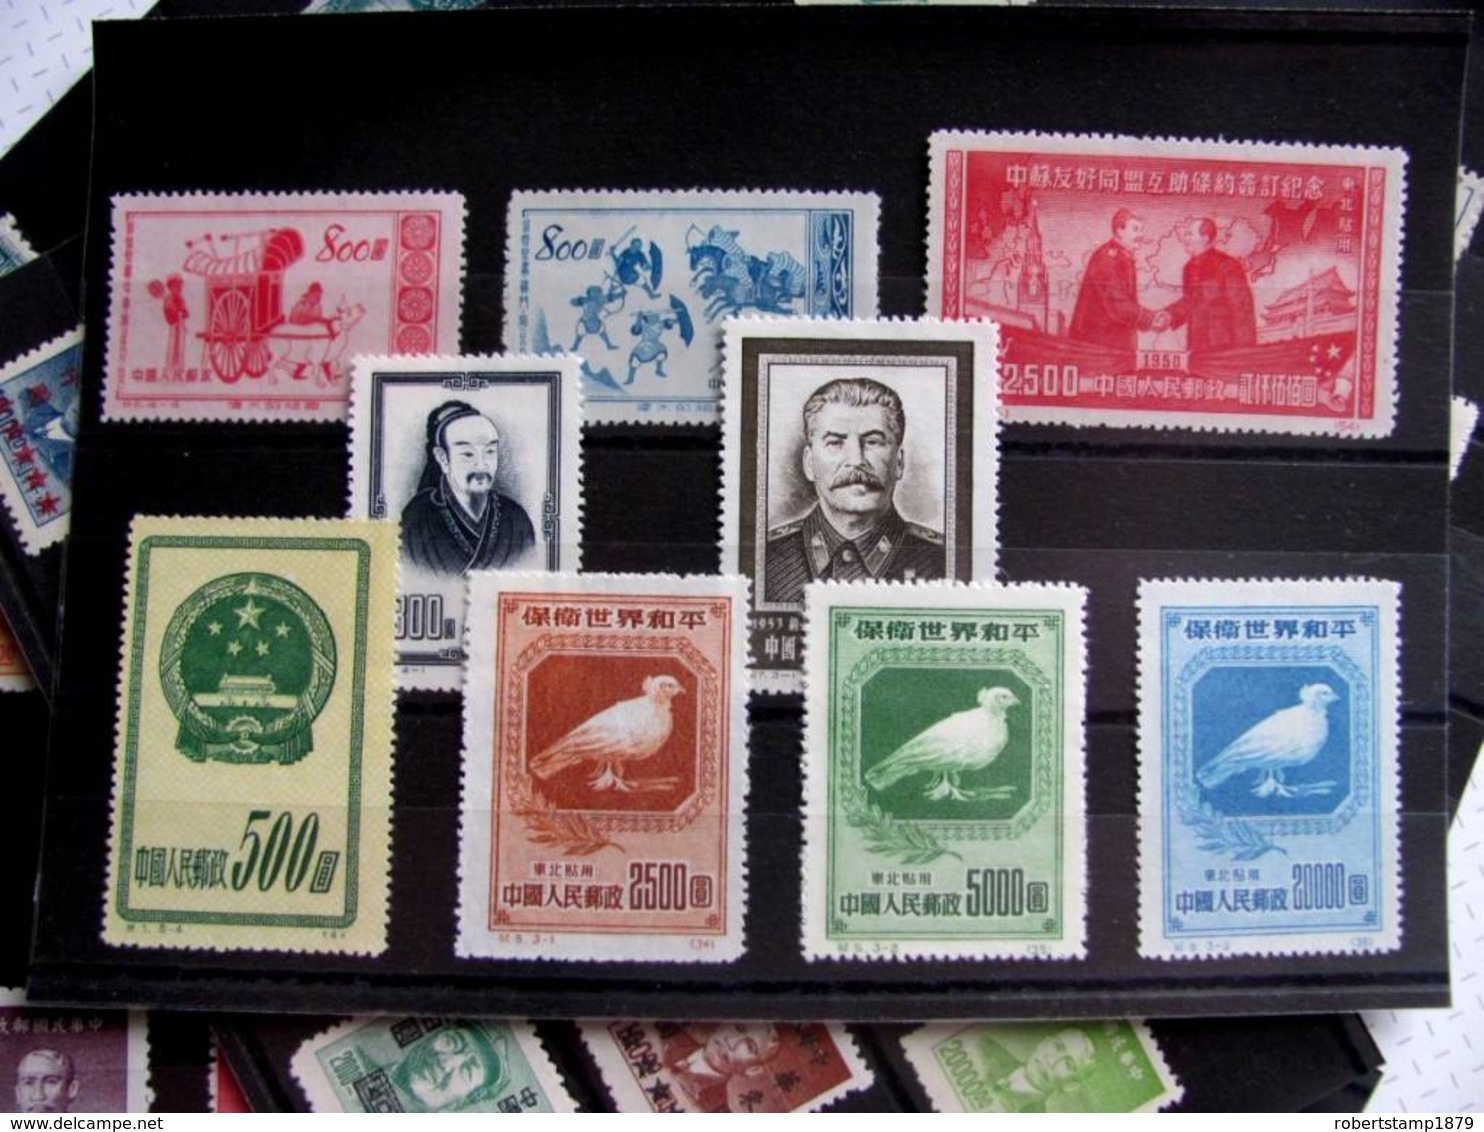 Lot stamps of China